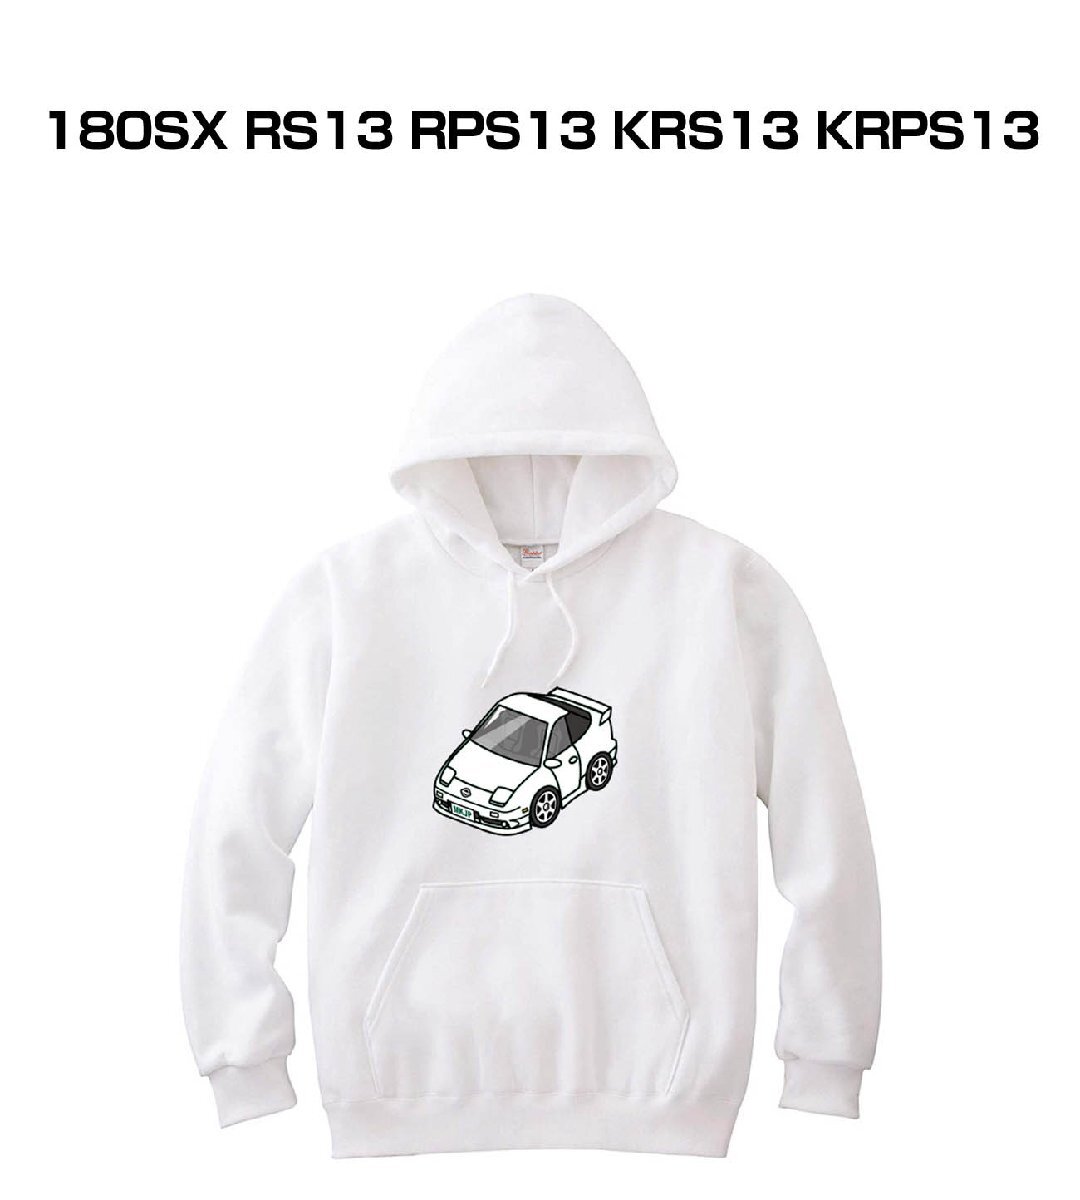 MKJP パーカー 車好き プレゼント 車 180SX RS13 RPS13 KRS13 KRPS13 送料無料